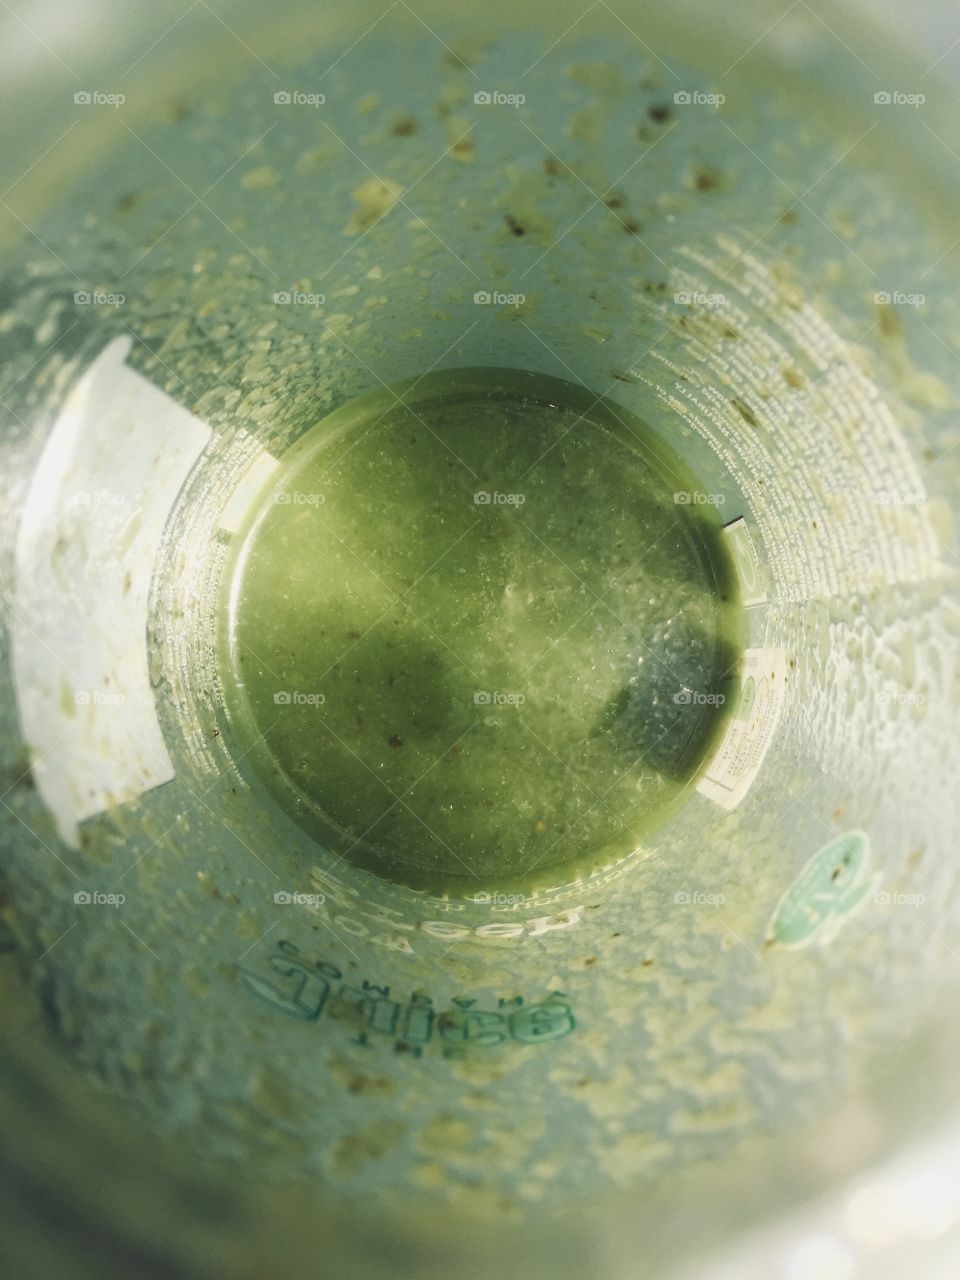 Birds eye view down the lid of a wow green smoothie